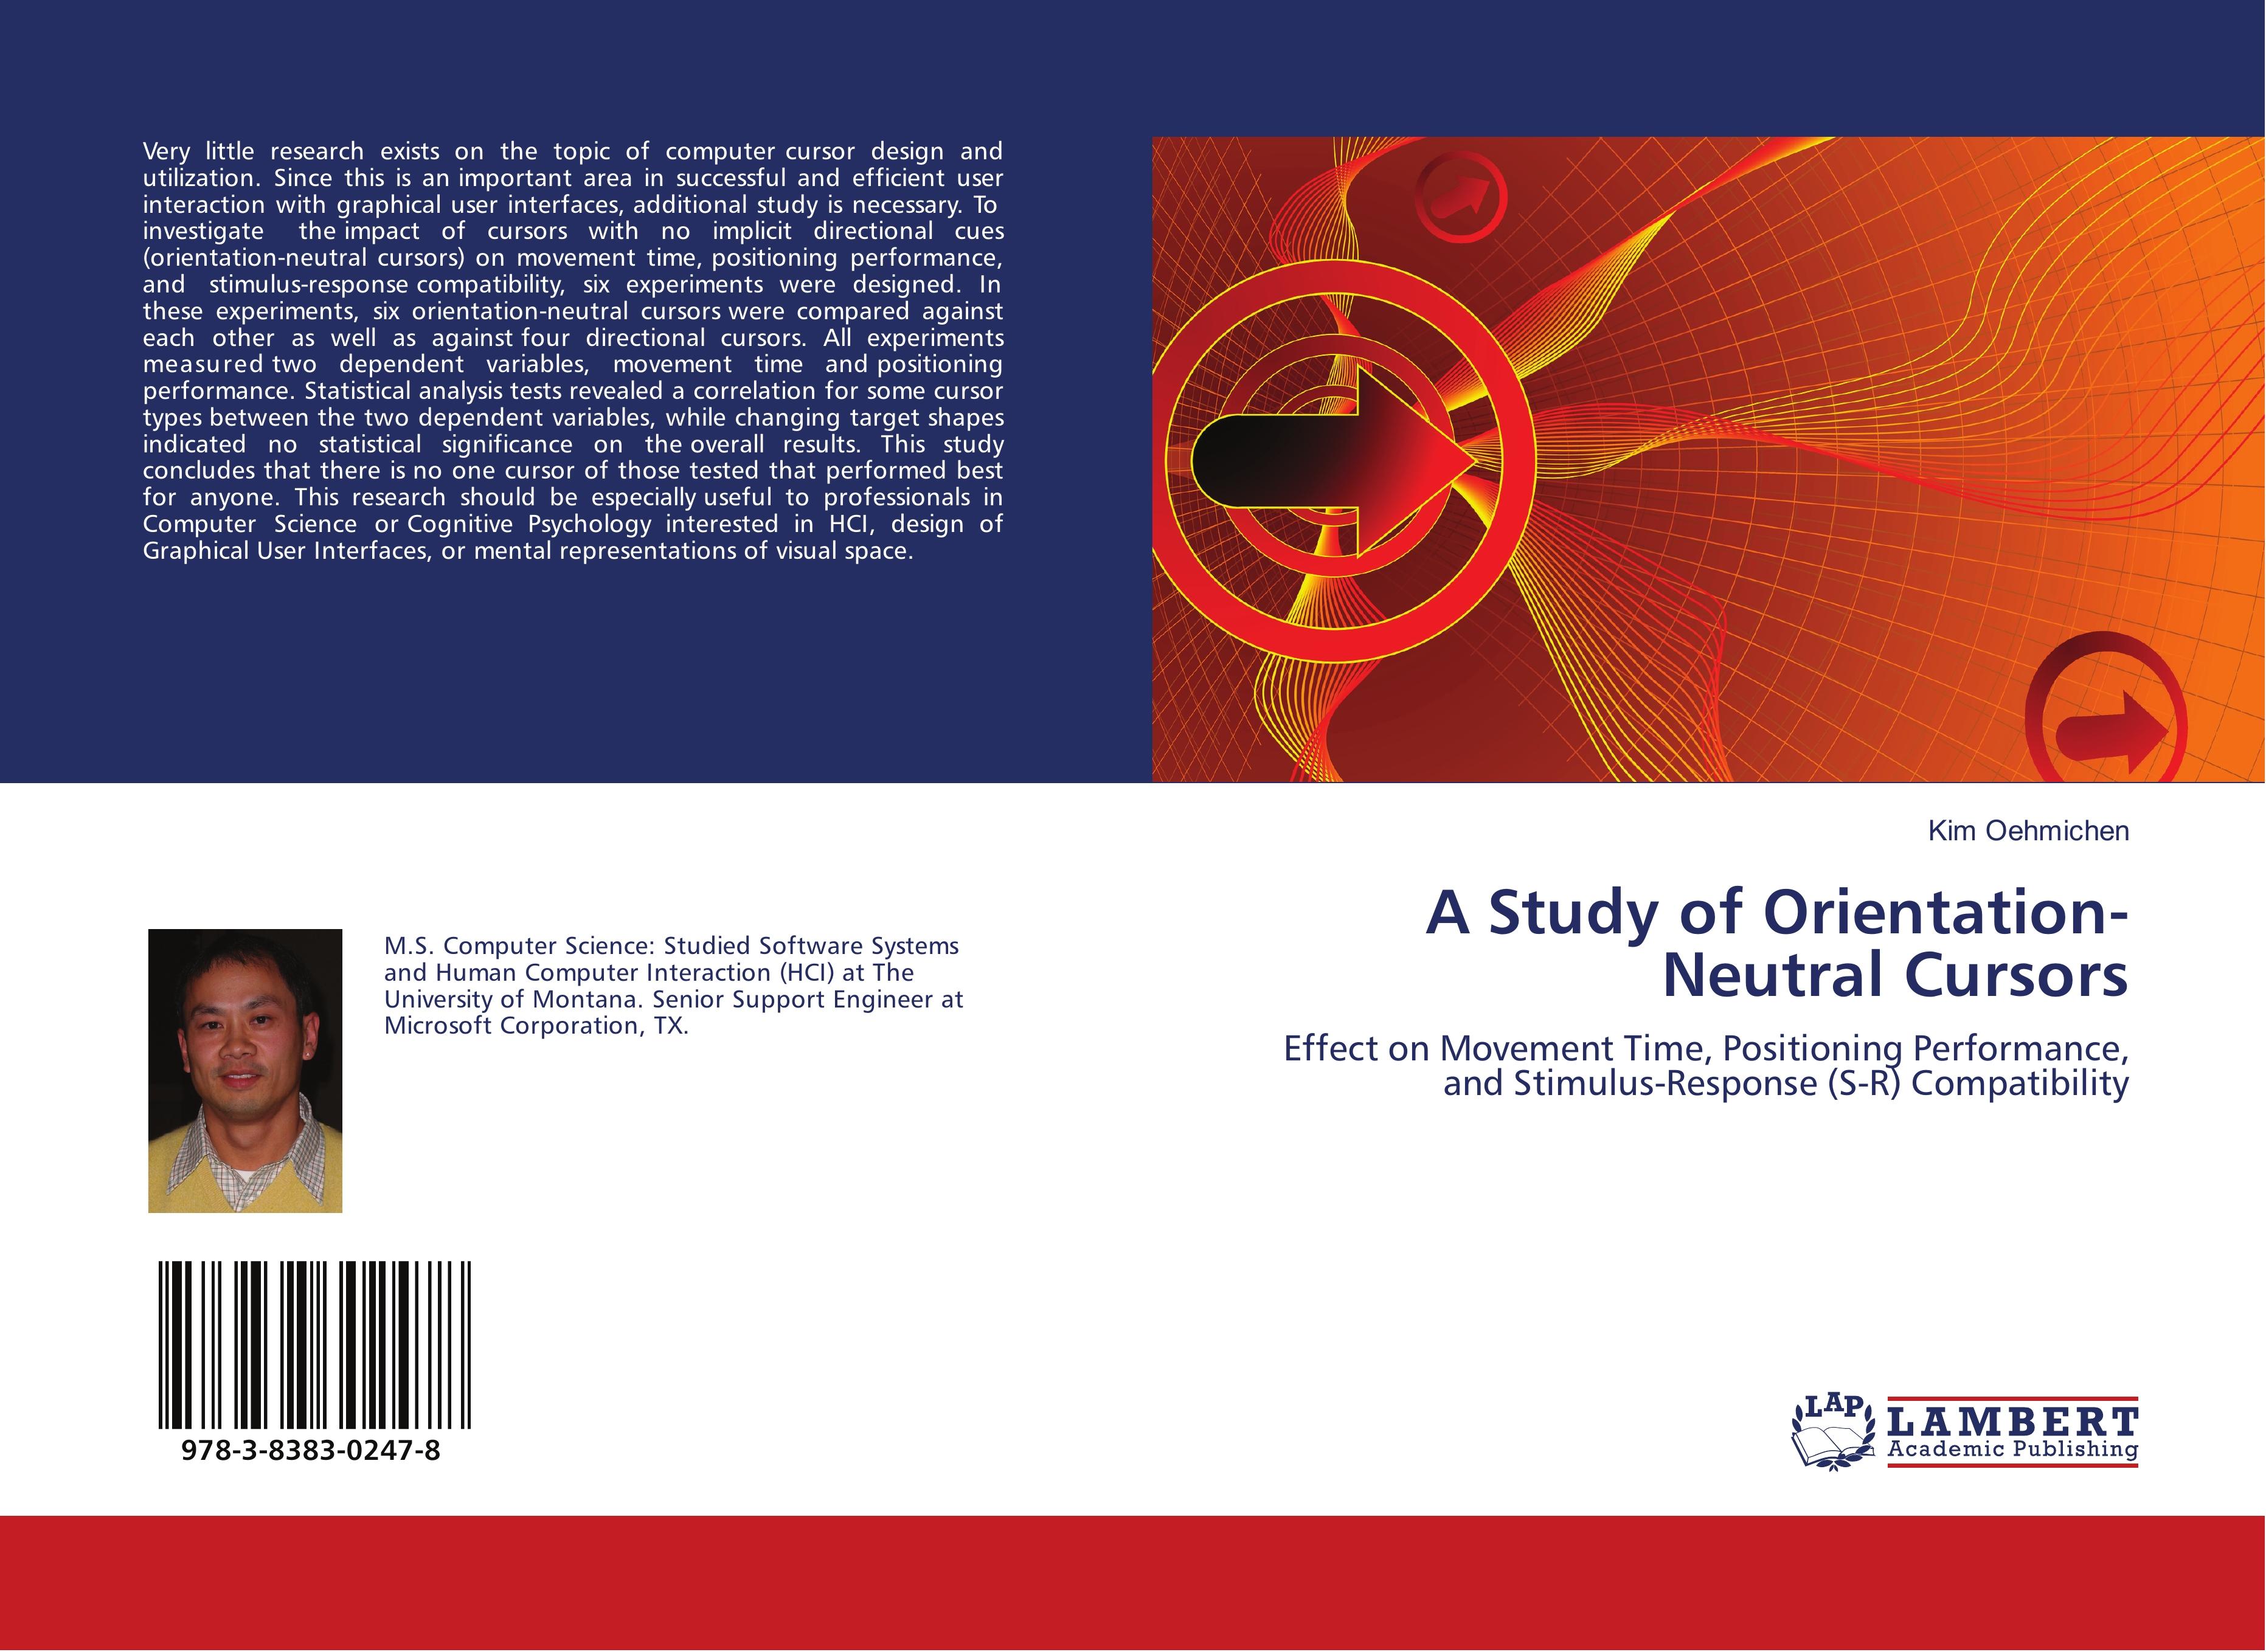 A Study of Orientation-Neutral Cursors / Effect on Movement Time, Positioning Performance, and Stimulus-Response (S-R) Compatibility / Kim Oehmichen / Taschenbuch / Paperback / 88 S. / Englisch / 2009 - Oehmichen, Kim